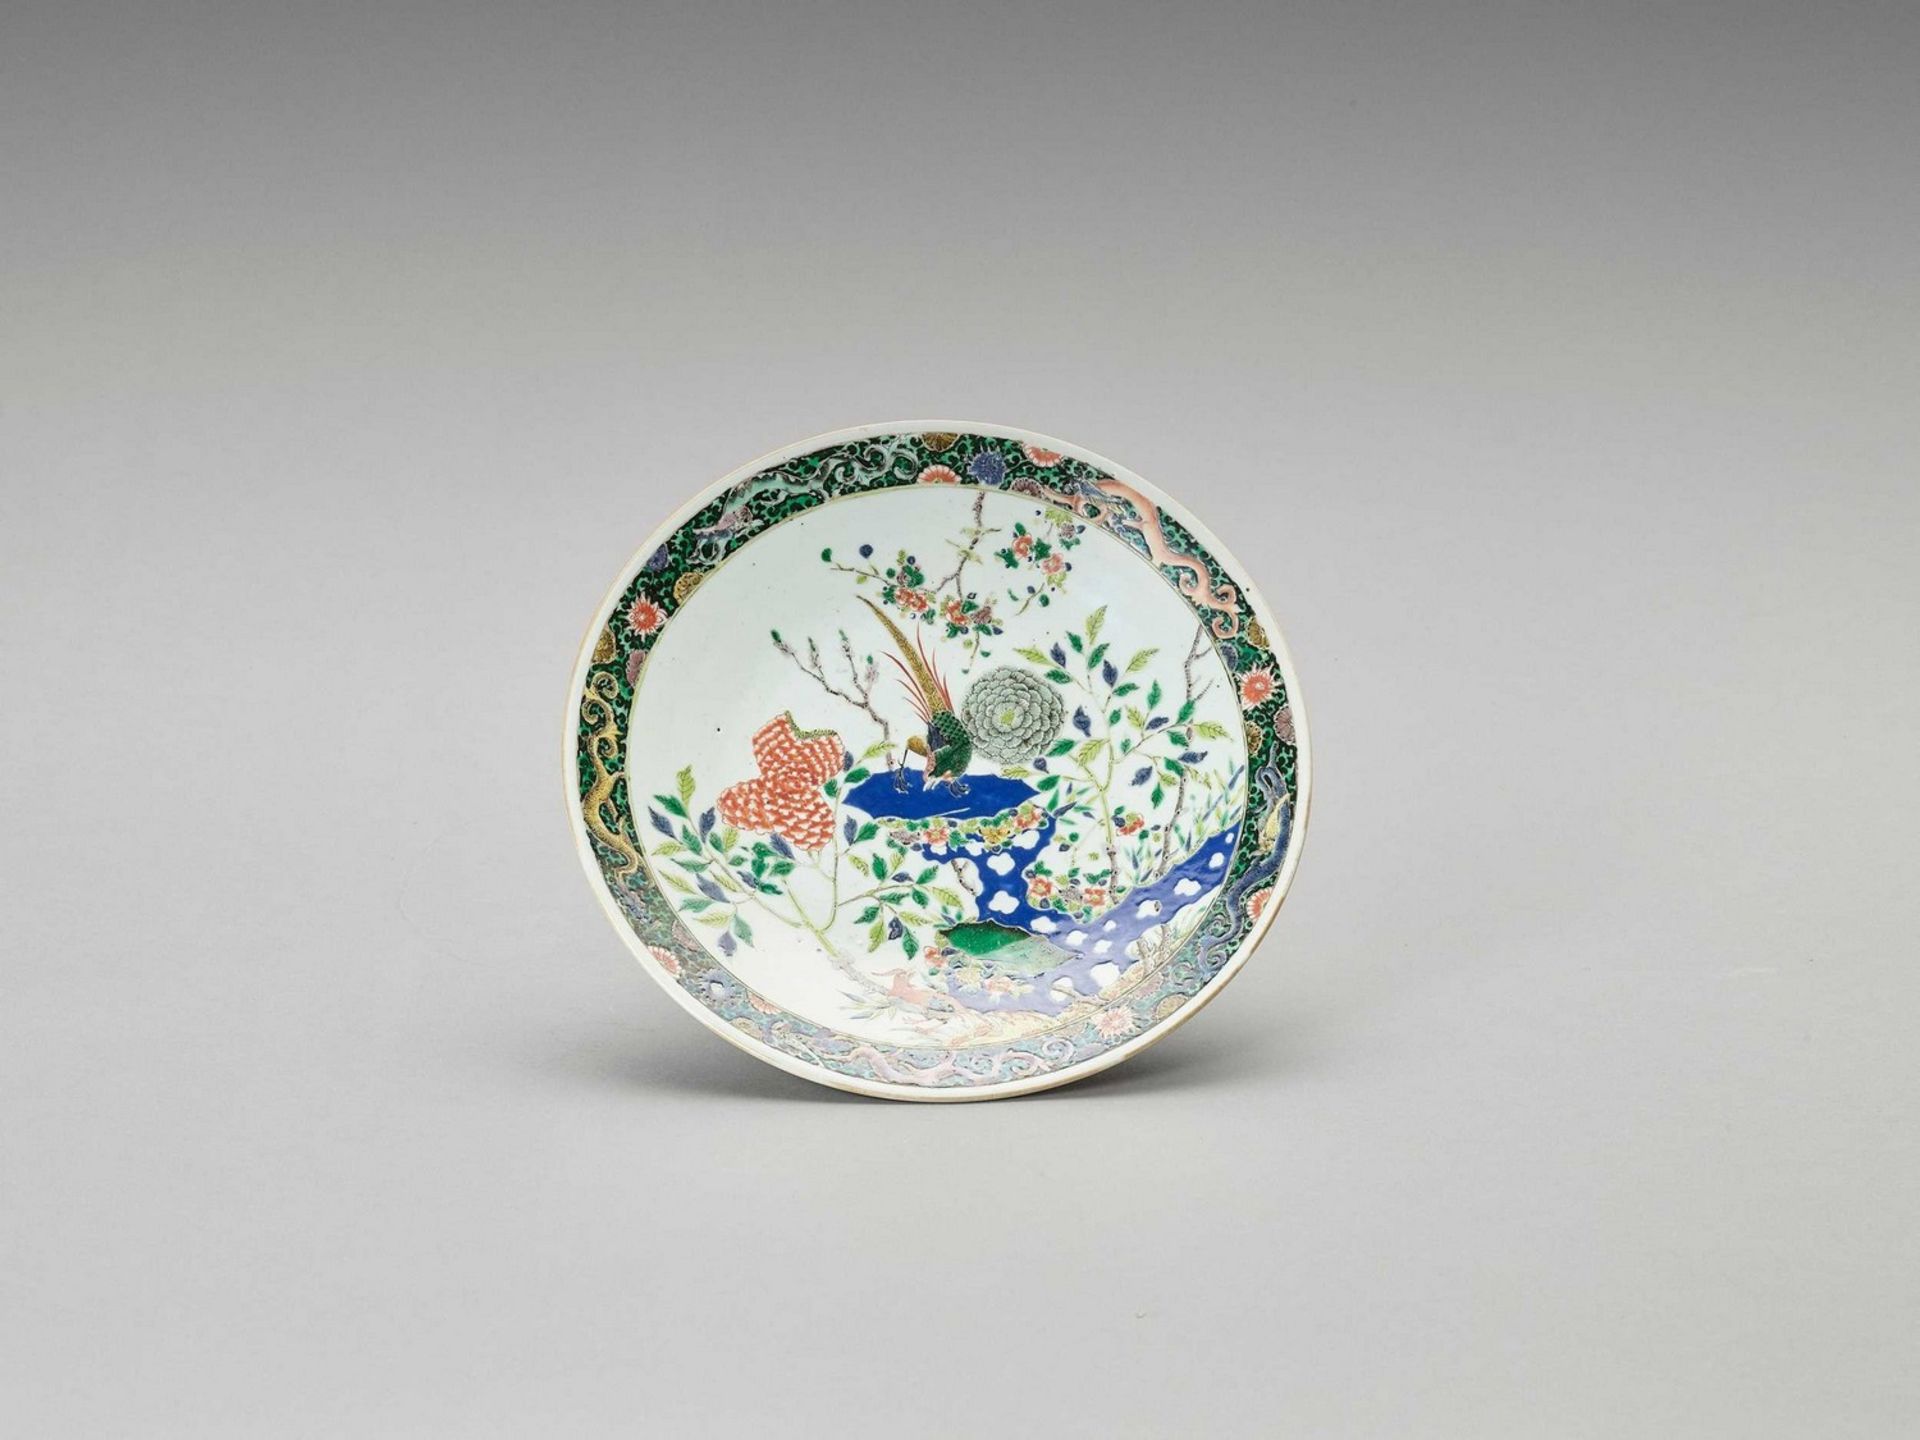 A FAMILLE VERTE PORCELAIN ‘BIRDS AND FLOWERS’ DISH, QING